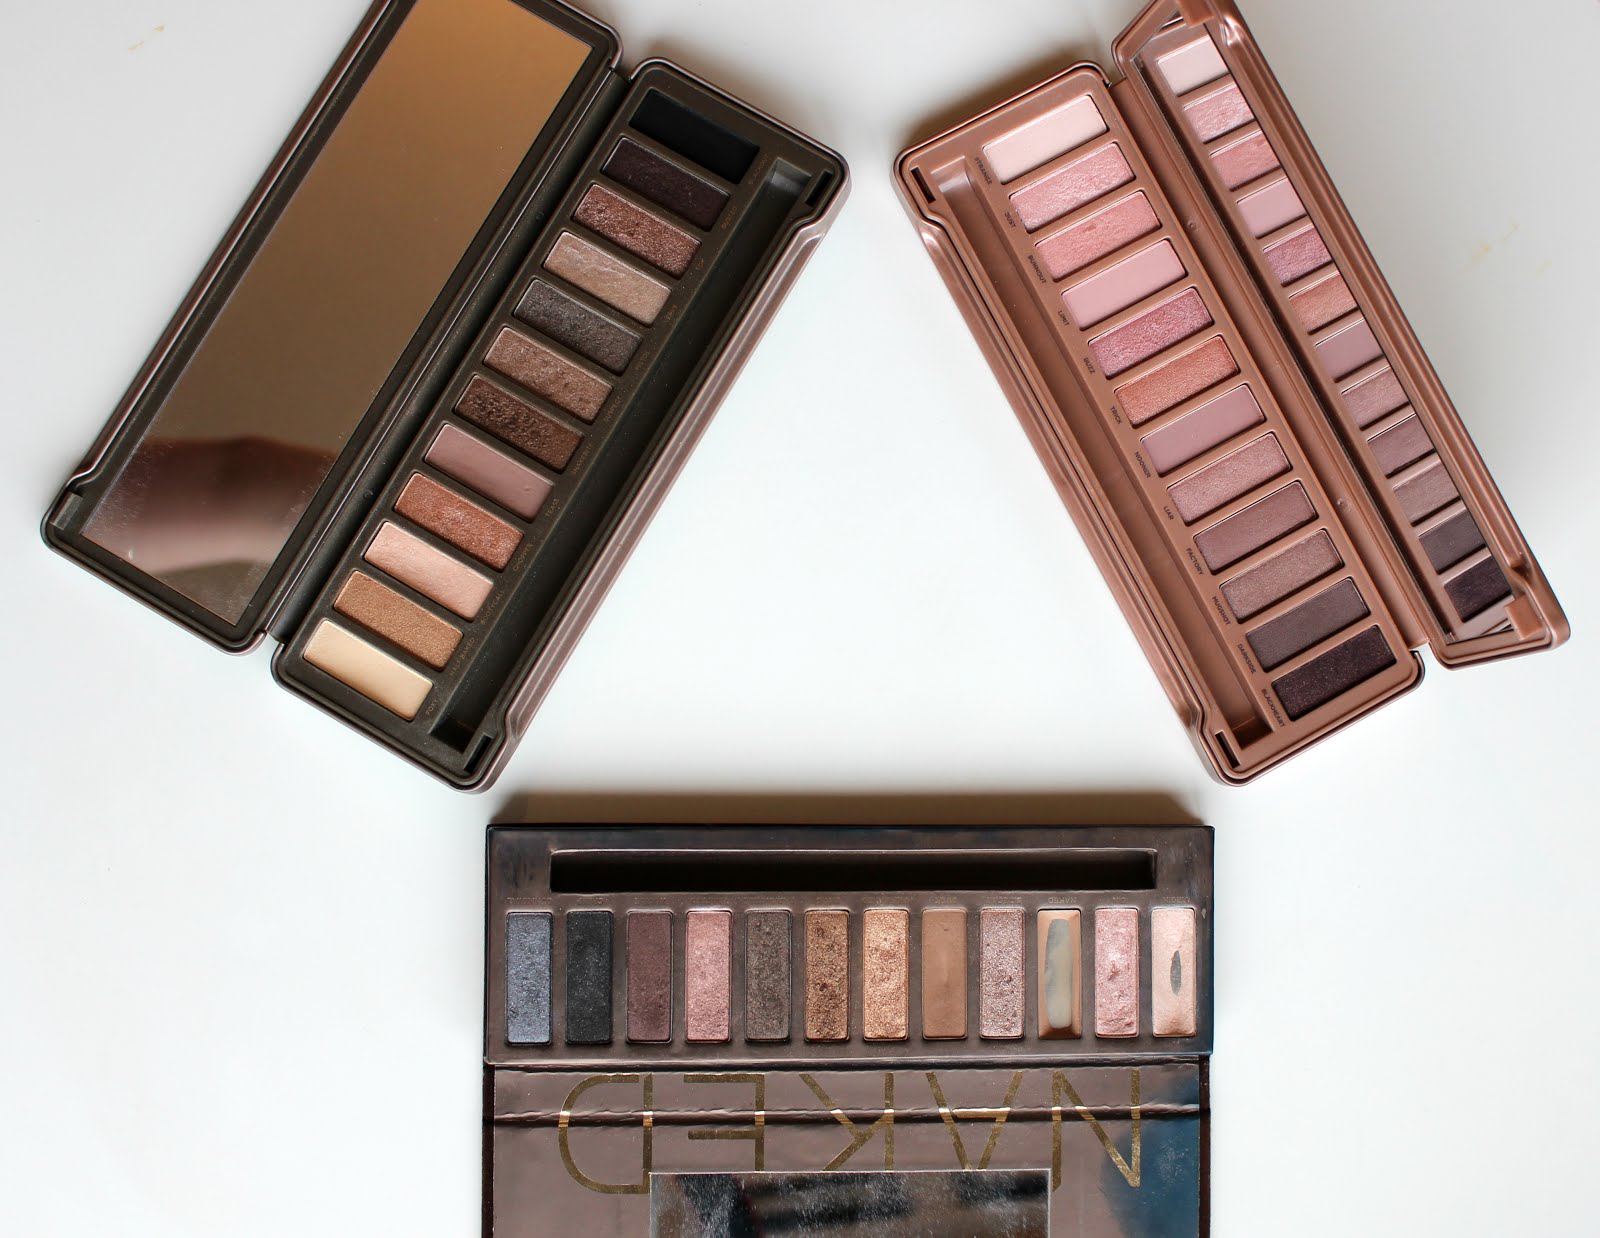 Urban Decay Naked Palette 2: Review, Swatches, UK Availability